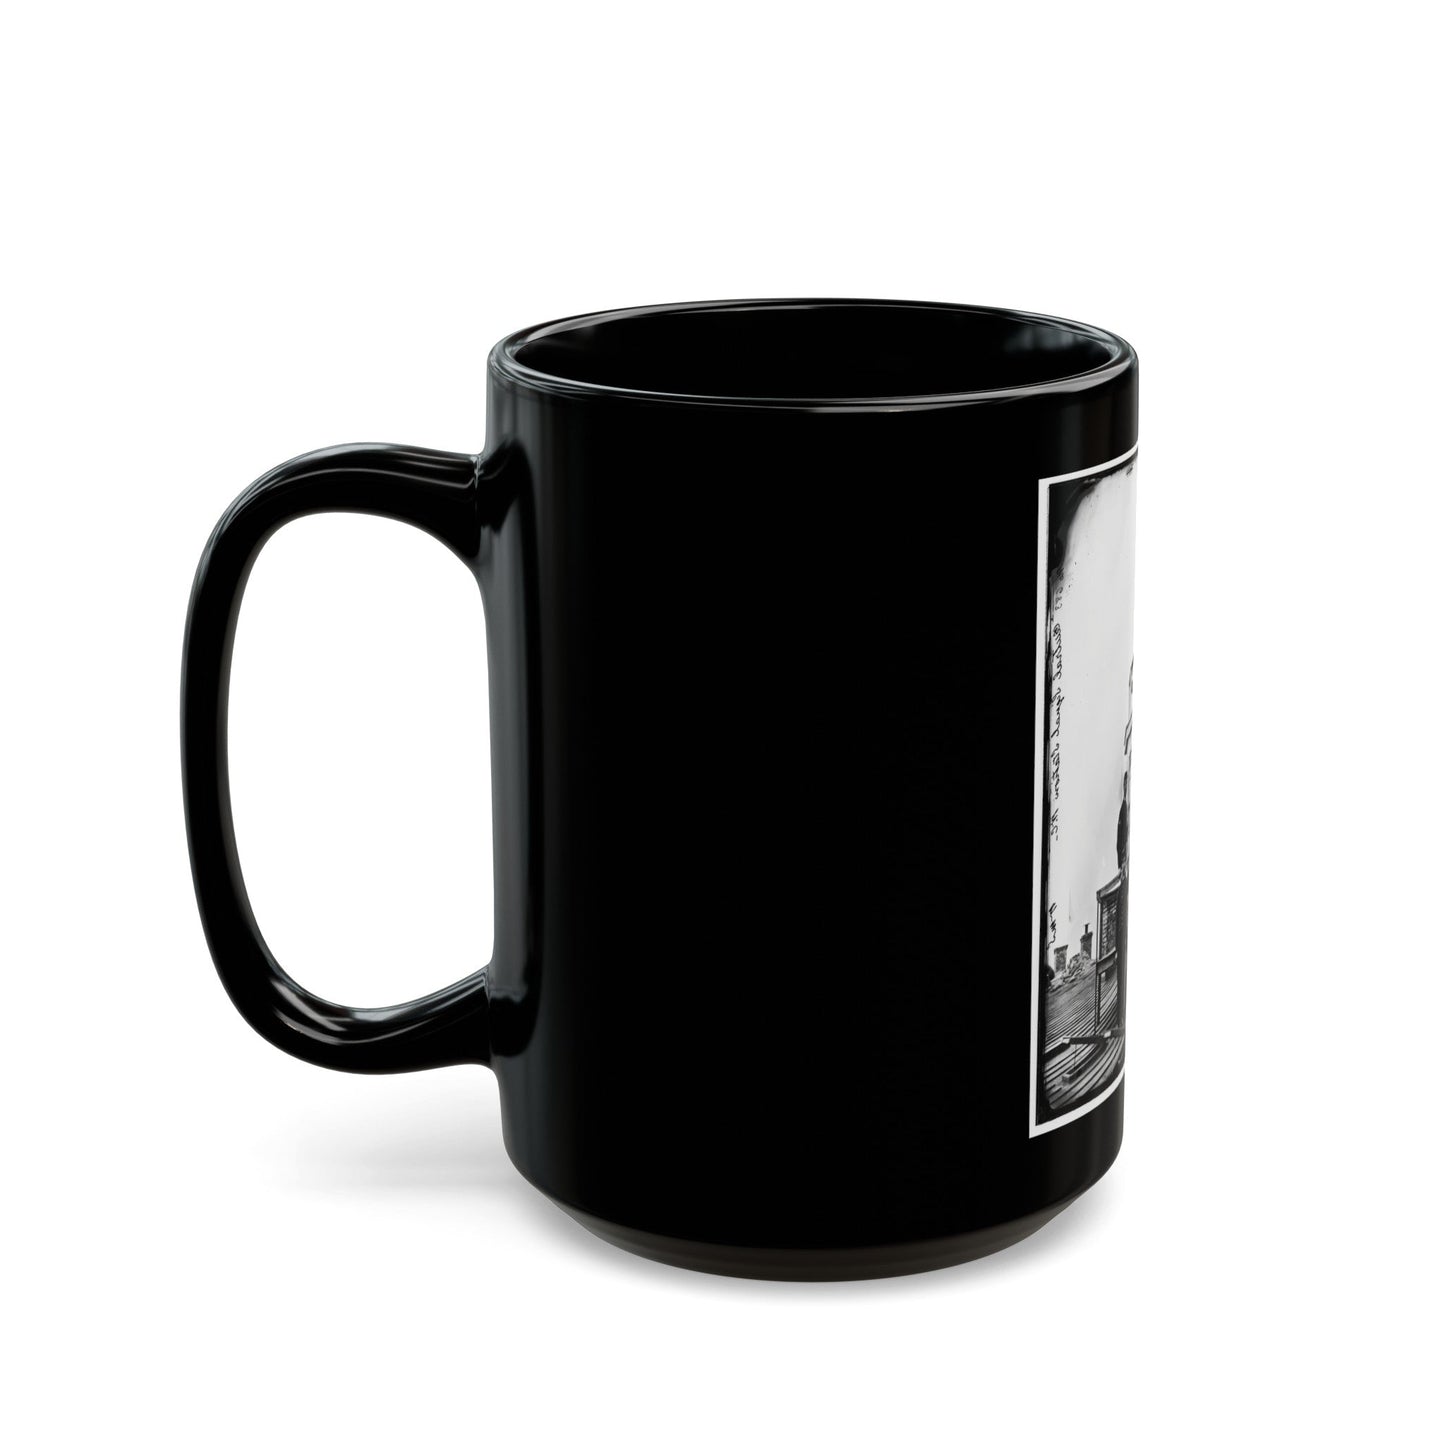 Washington, D.C. Central Signal Station, Winder Building, 17th And E Streets Nw, And Signal Corps Men (U.S. Civil War) Black Coffee Mug-The Sticker Space